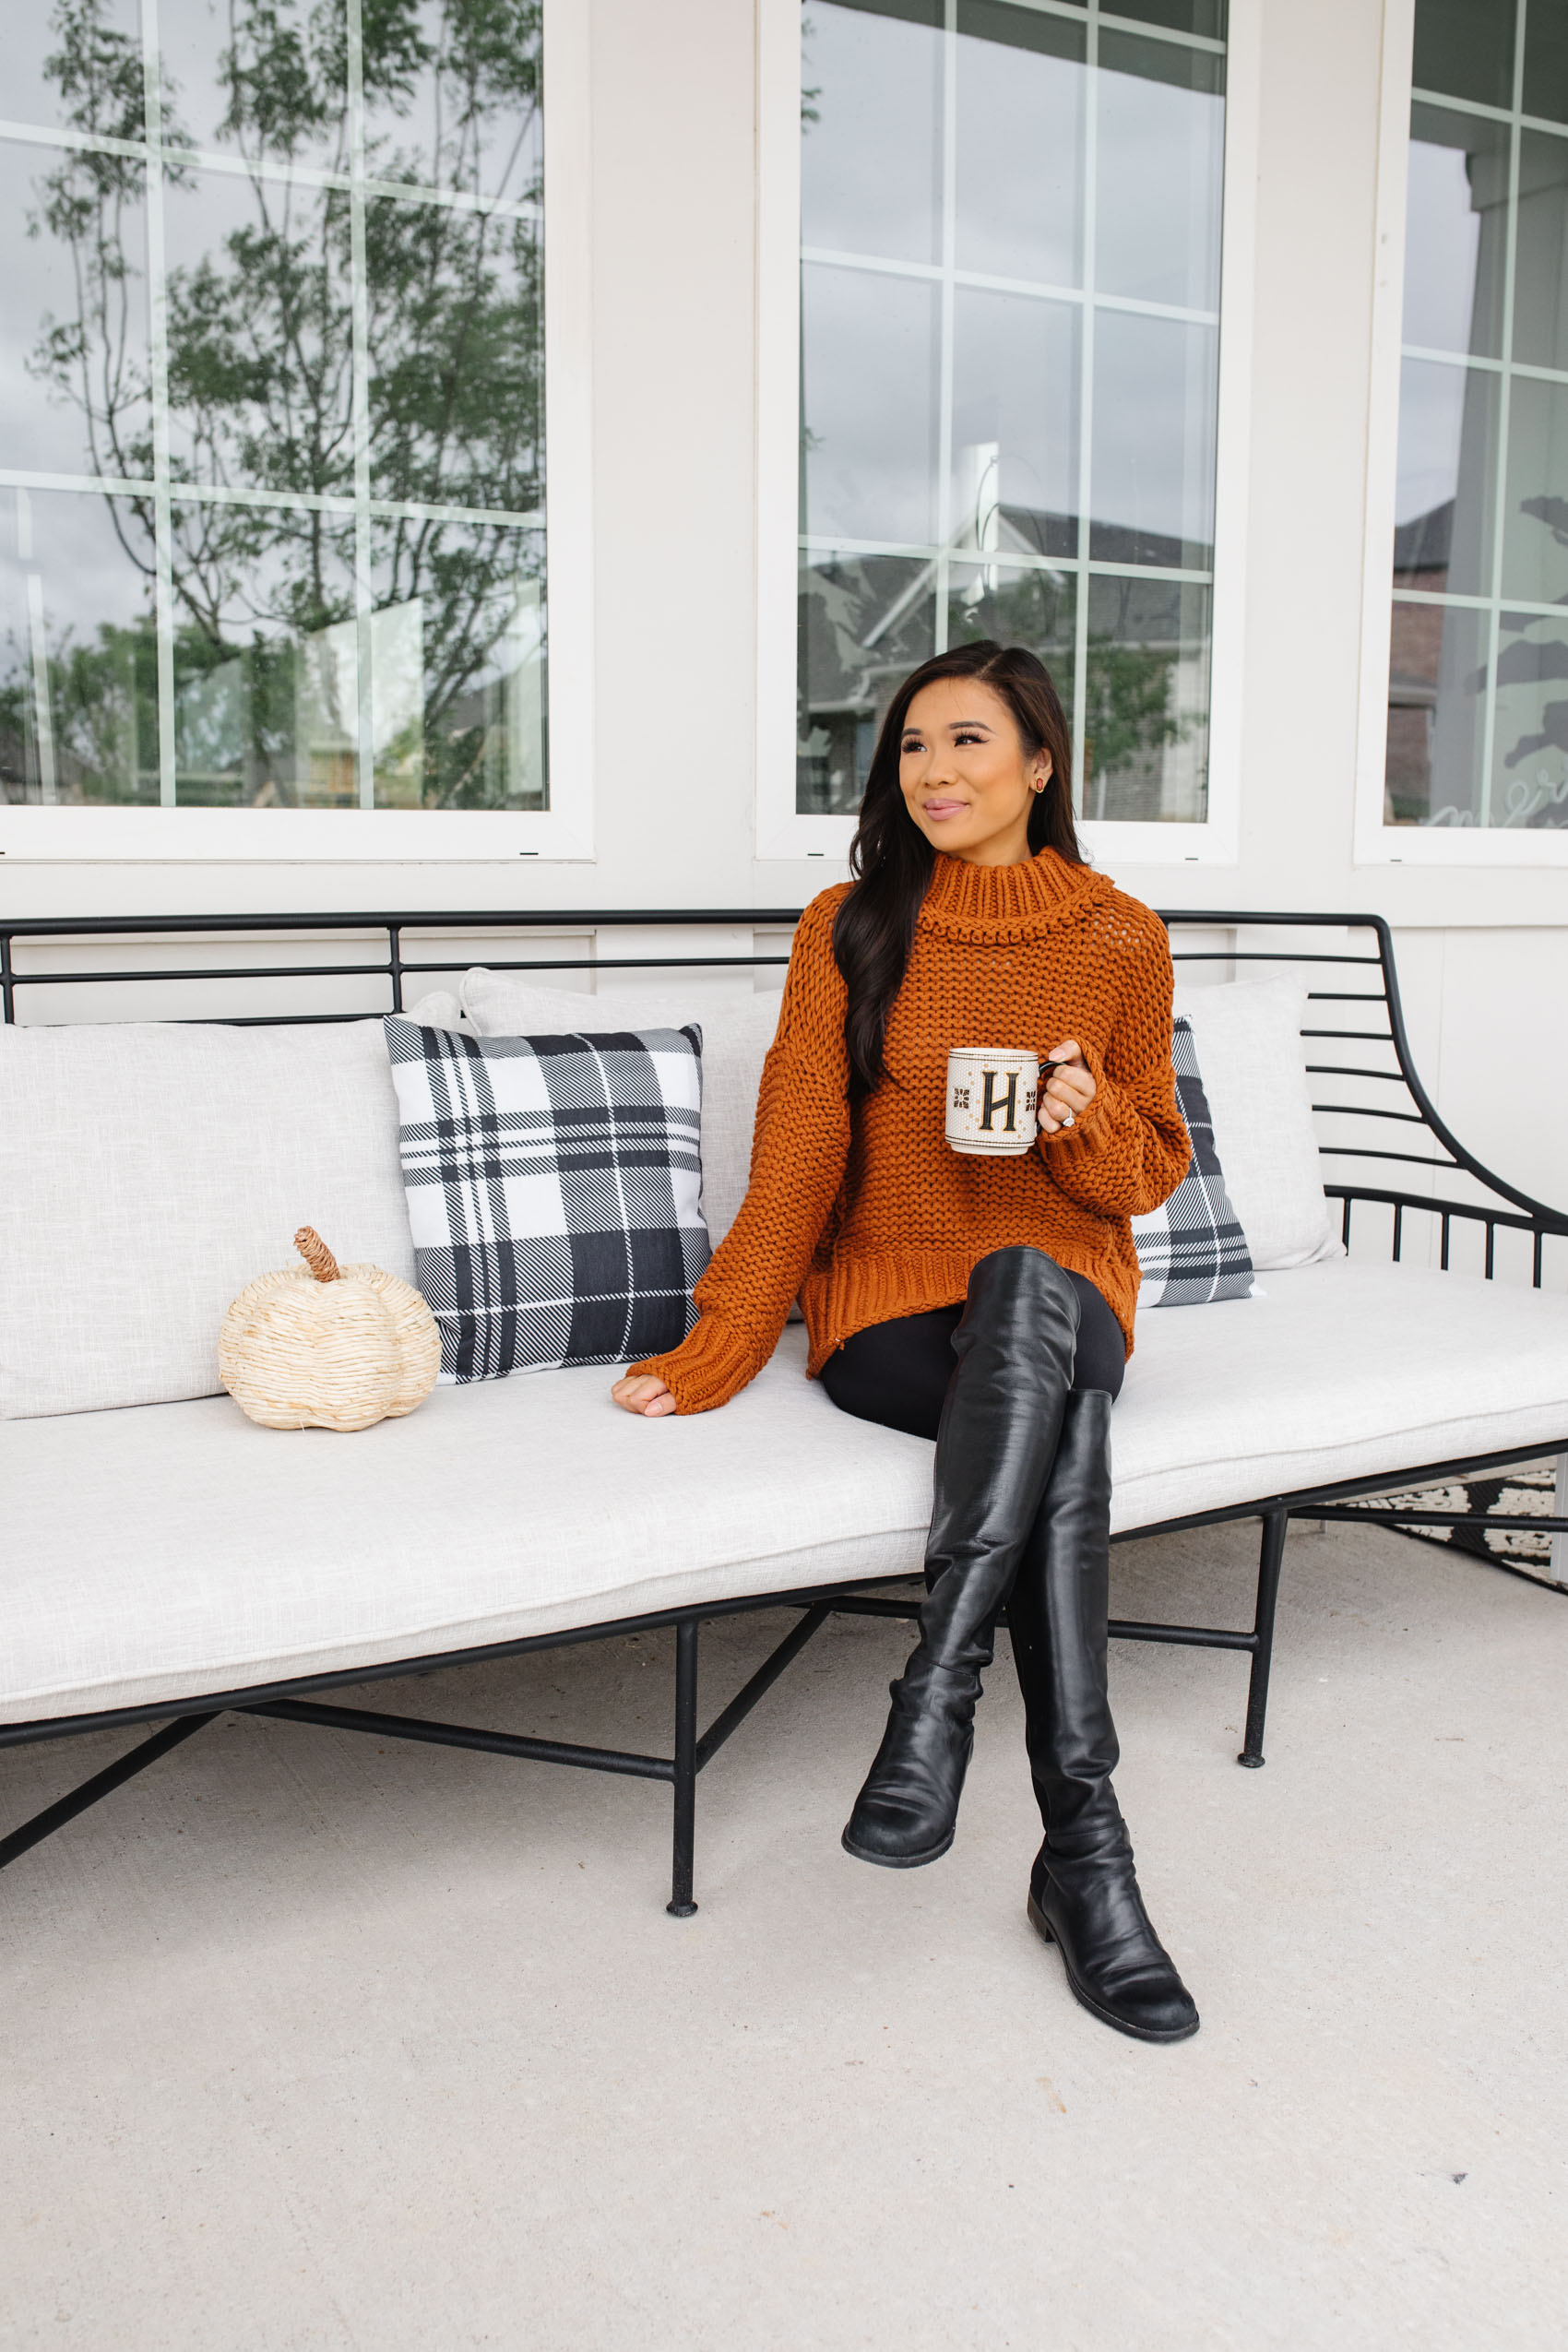 Blogger Hoang-Kim wearing a free people my only sunshine sweater, stuart weitzman 5050 over the knee boots, on her CB2 breton sofa with plaid pillows and anthropologie monogram mug